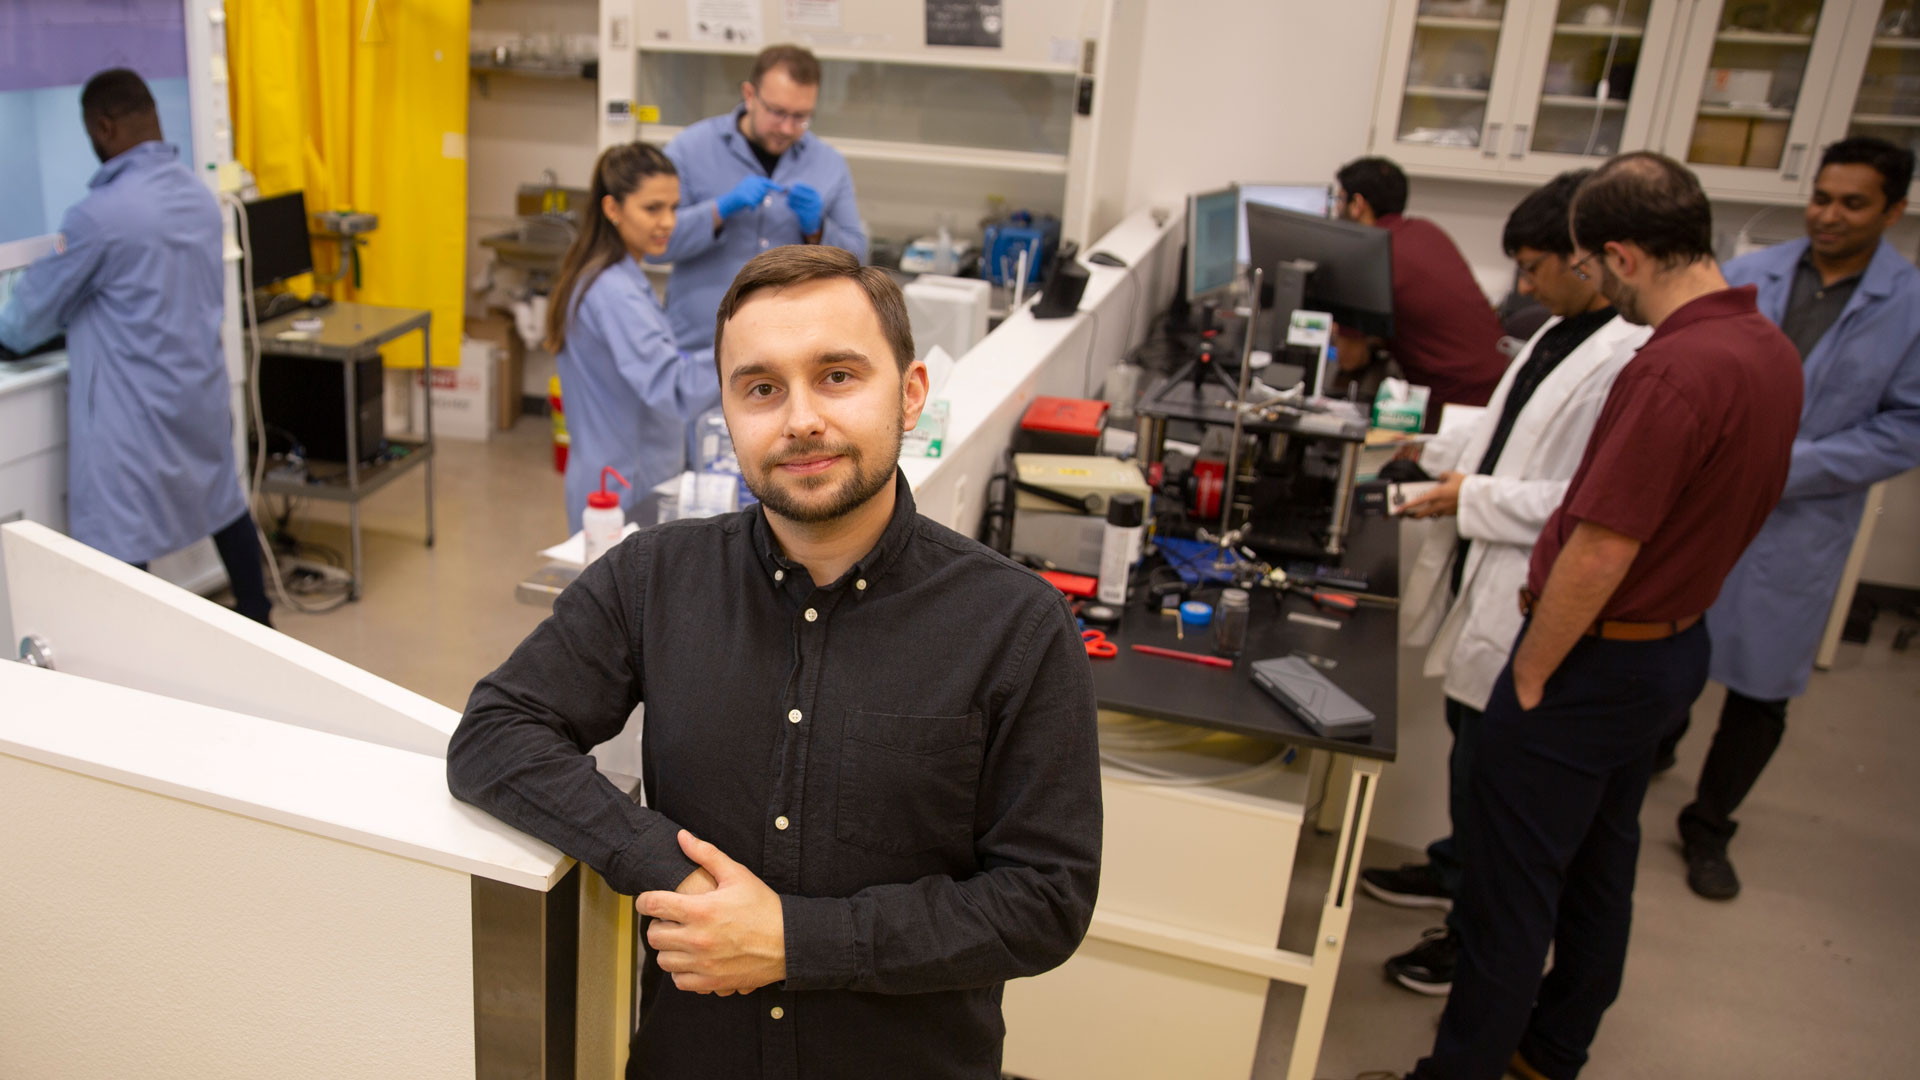 Aliaksandr "Sasha" Sharstniou poses in Assistant Professor Bruno Azeredo's lab while other students work in the background.